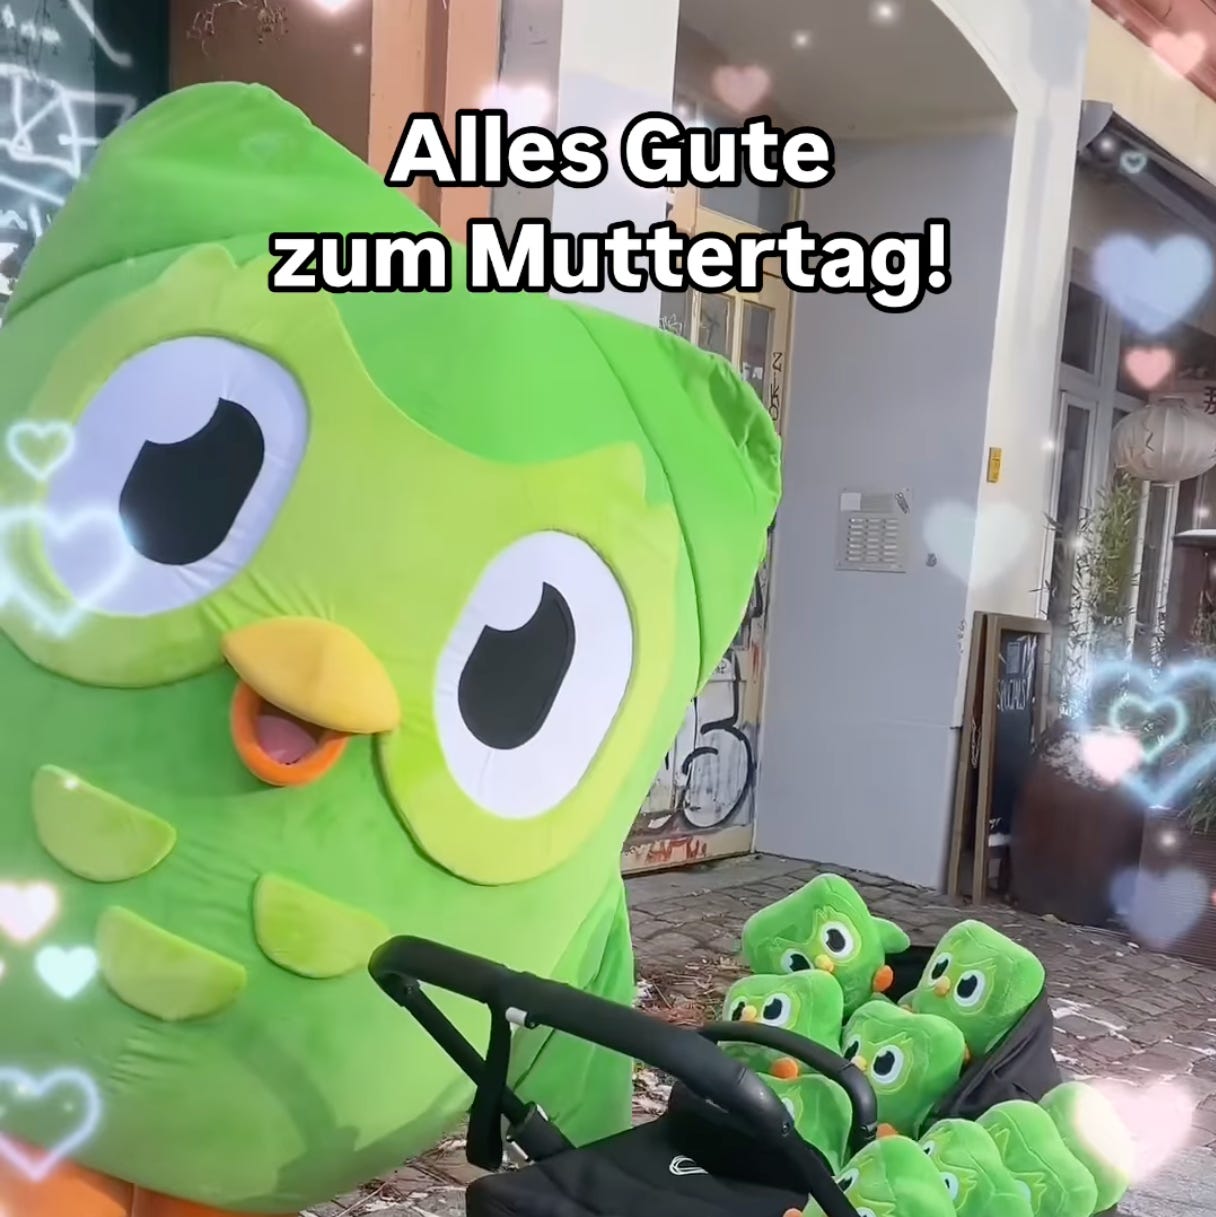 Duo, a large green owl mascot, stands over a stroller with many little baby green owls in it. The sentence "alles gute zum Muttertag" is superimposed on top.